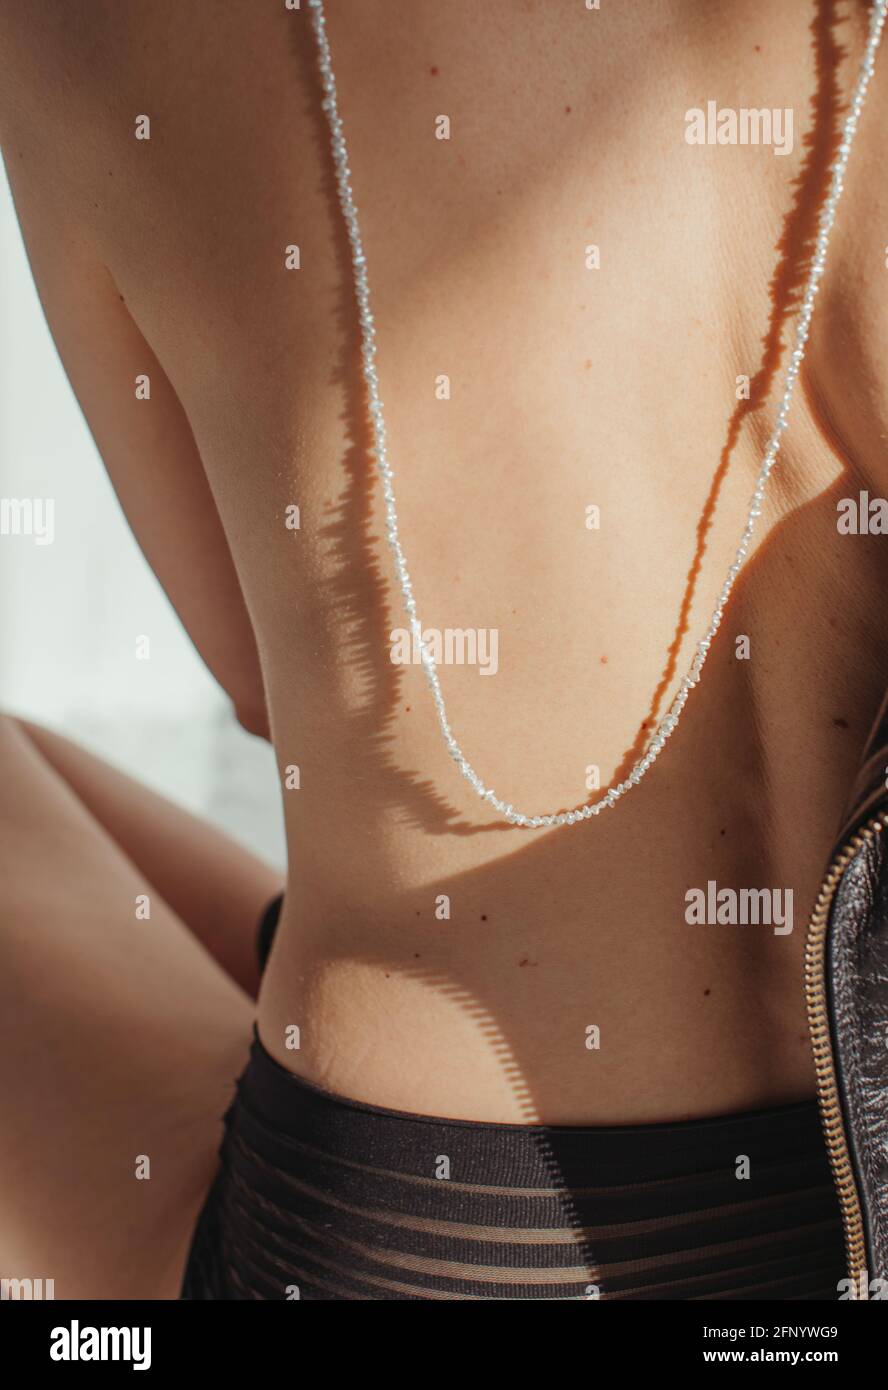 Rear view of a woman in lingerie wearing a necklace down her bare back Stock Photo